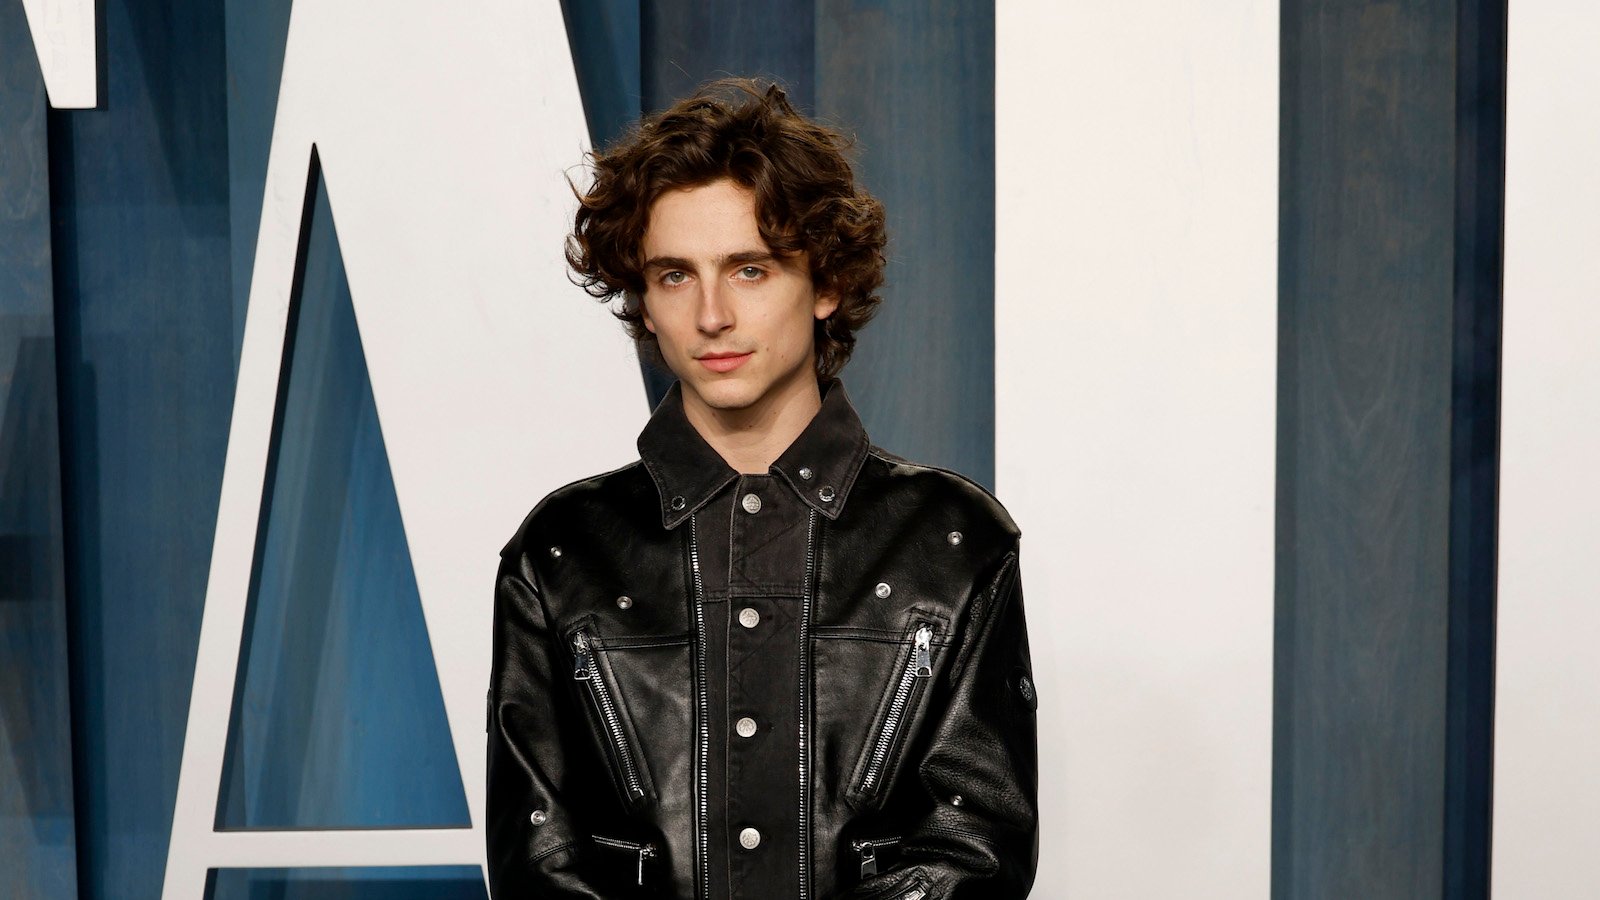 Timothee Chalamet Shares Teaser For The Cannibal Movie Bones And All